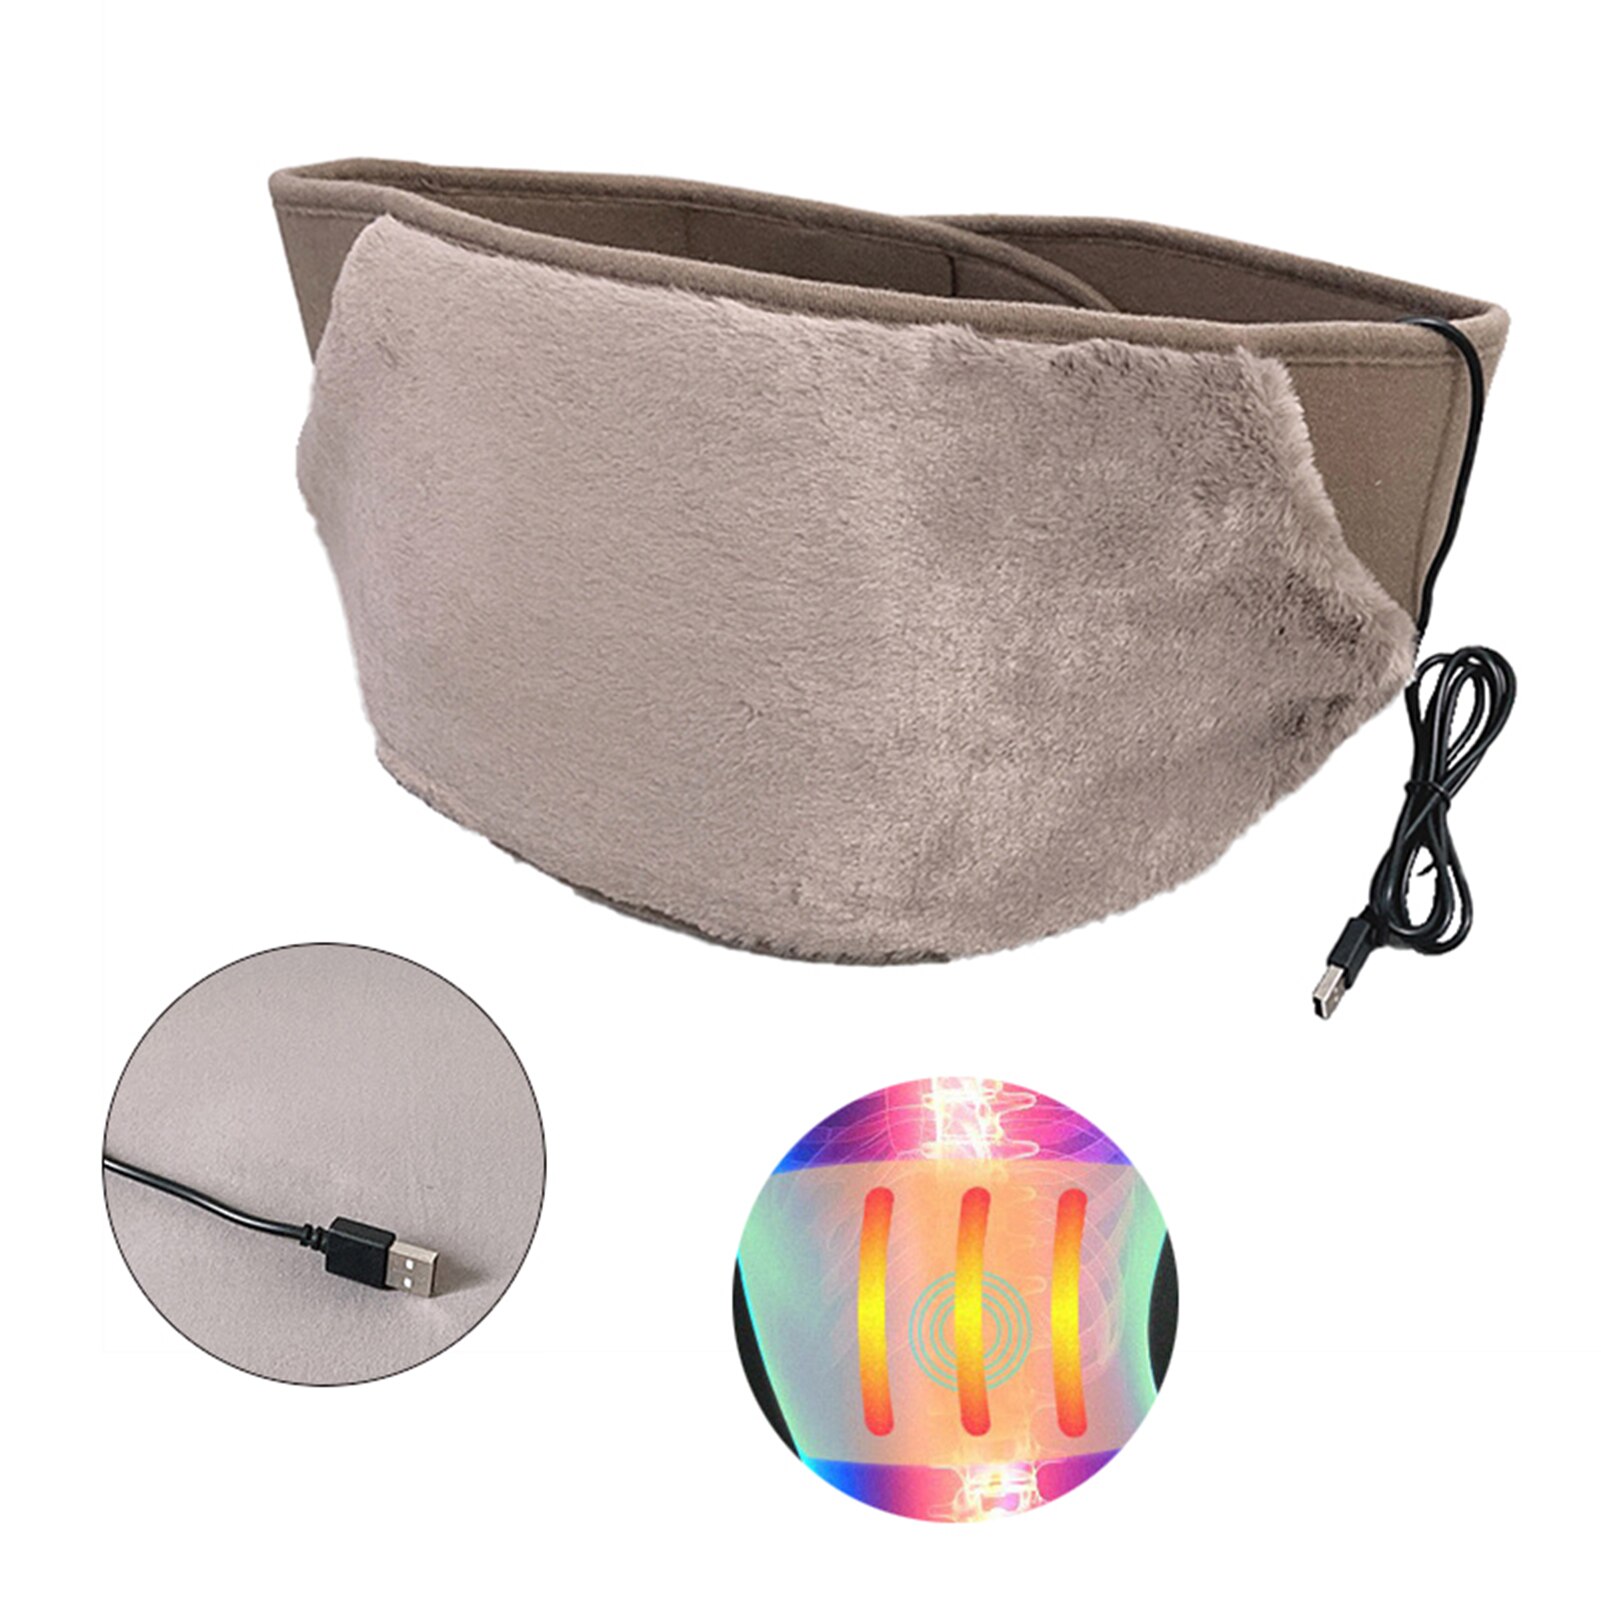 Heating Belt Adjustable Waist USB Electric Heating Magnetic Therapy For For Menstrual Cramp Lumbar Abdominal Leg Pain Relief